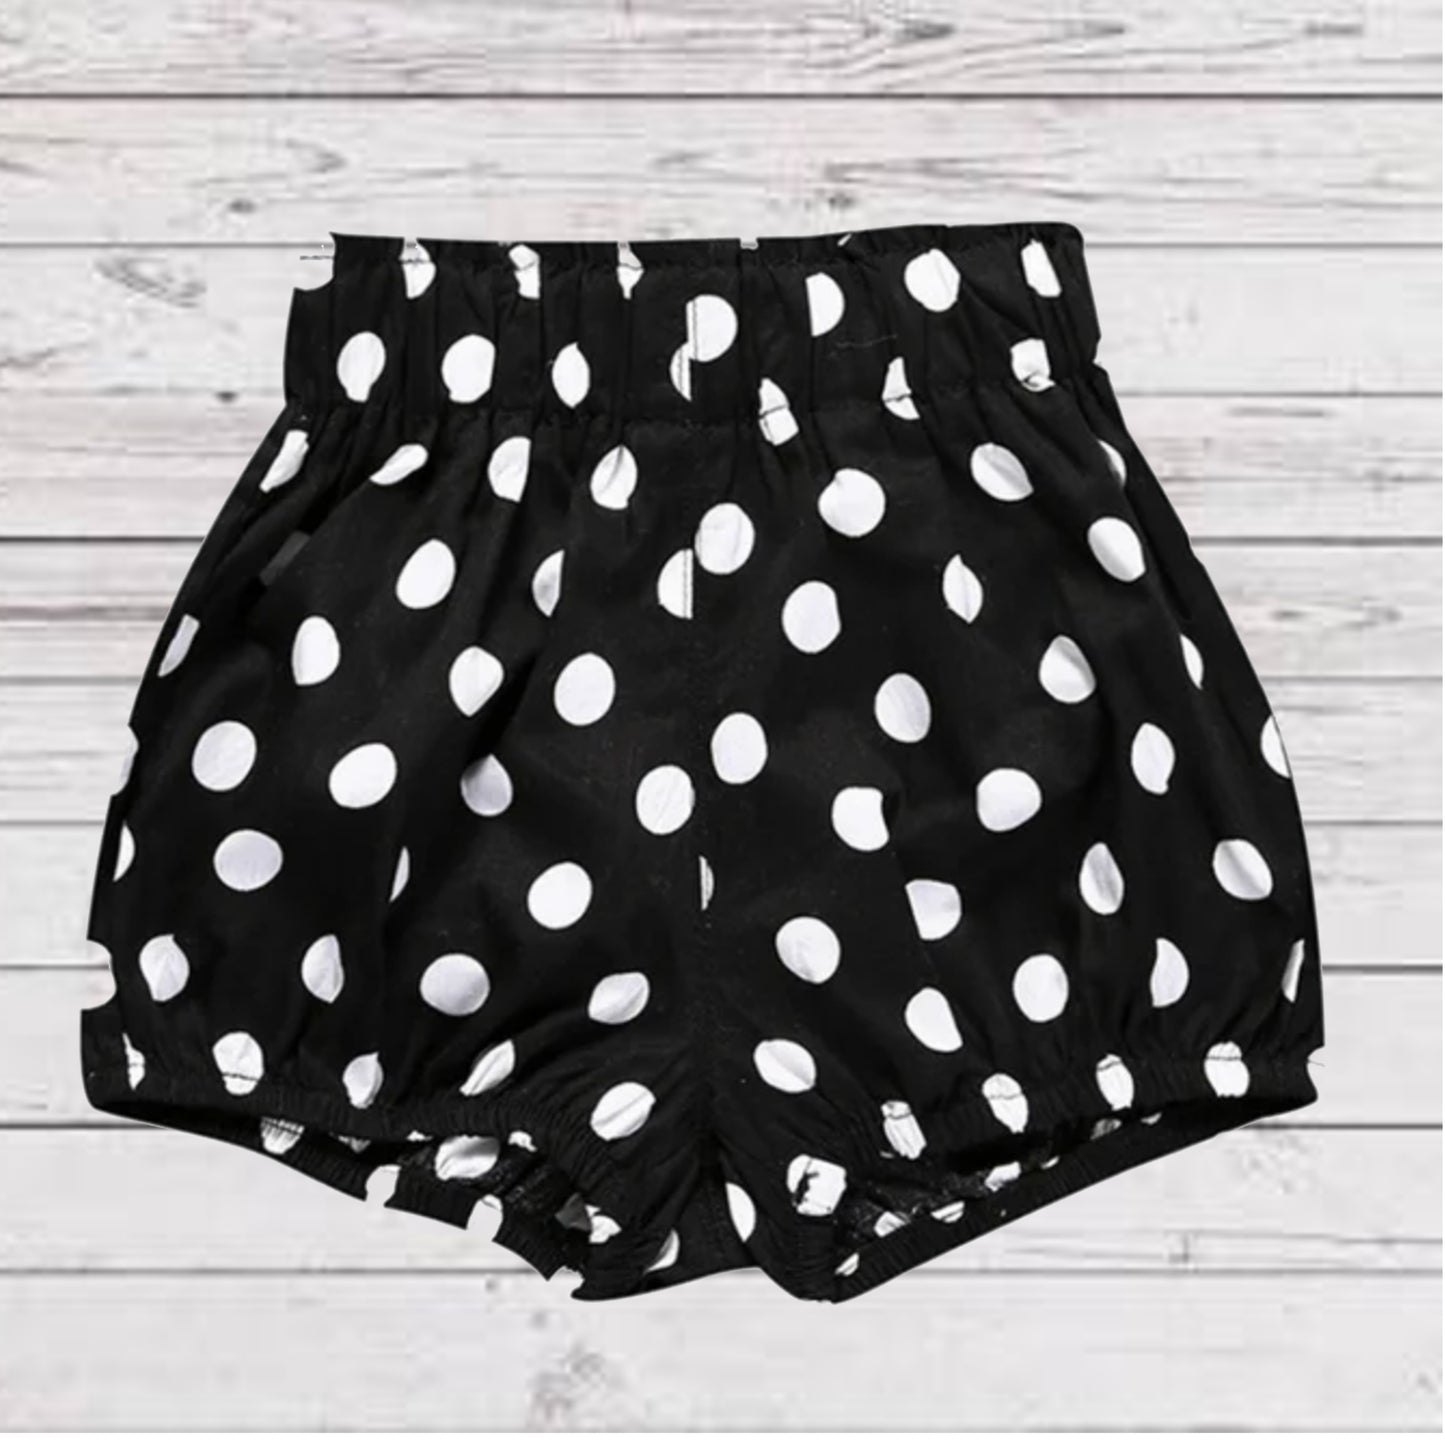 Baby Girls Black with White Polkadot Bloomers | Cotton High Waisted Diaper Cover | ADORABLE!